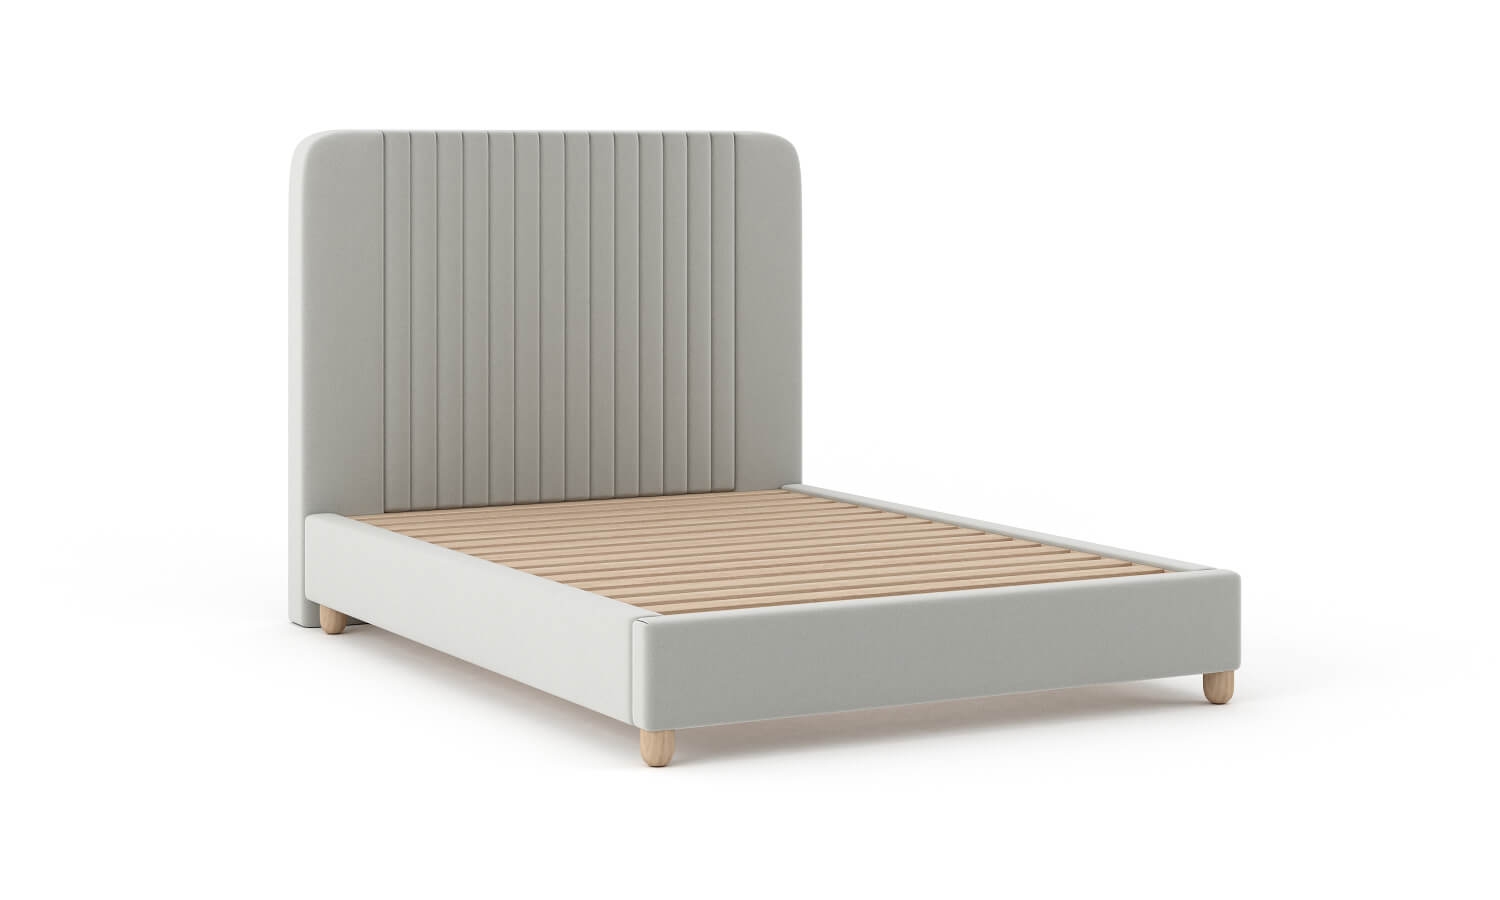 G: Pippen Bed in Smart Smoke fabric